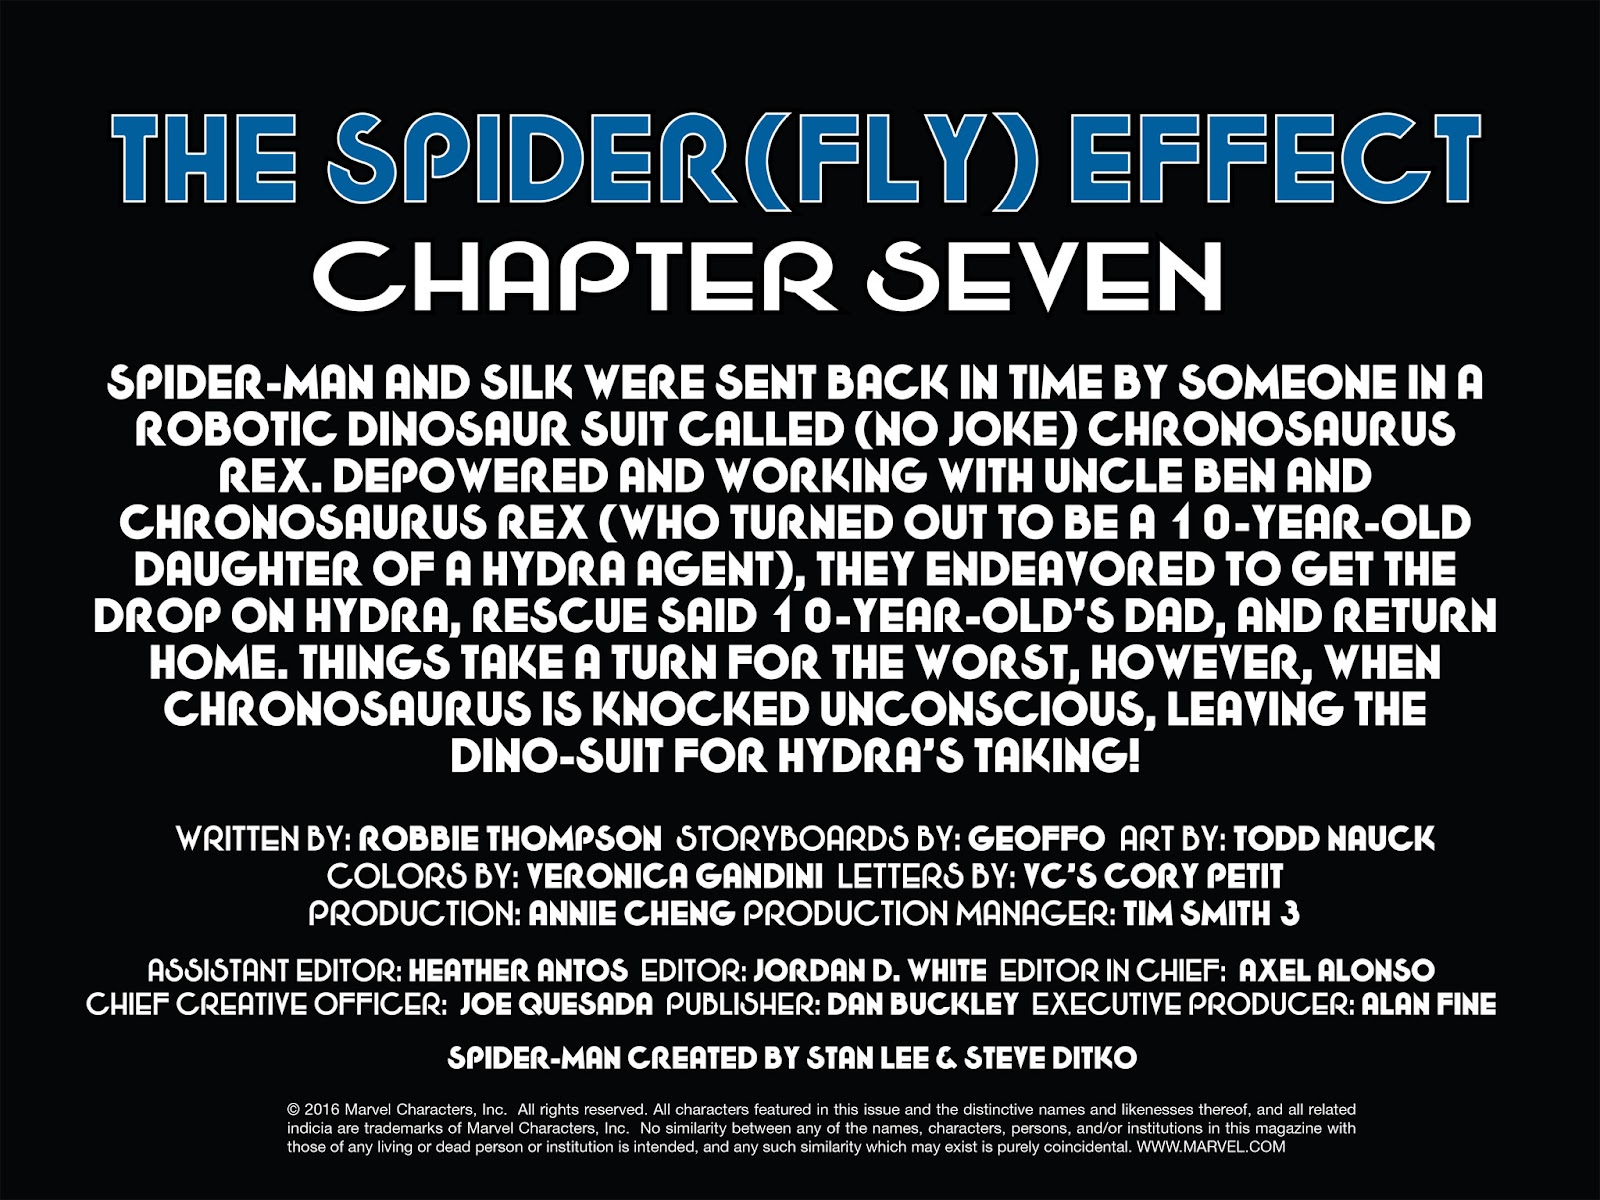 The Amazing Spider-Man & Silk: The Spider(fly) Effect (Infinite Comics) issue 7 - Page 12